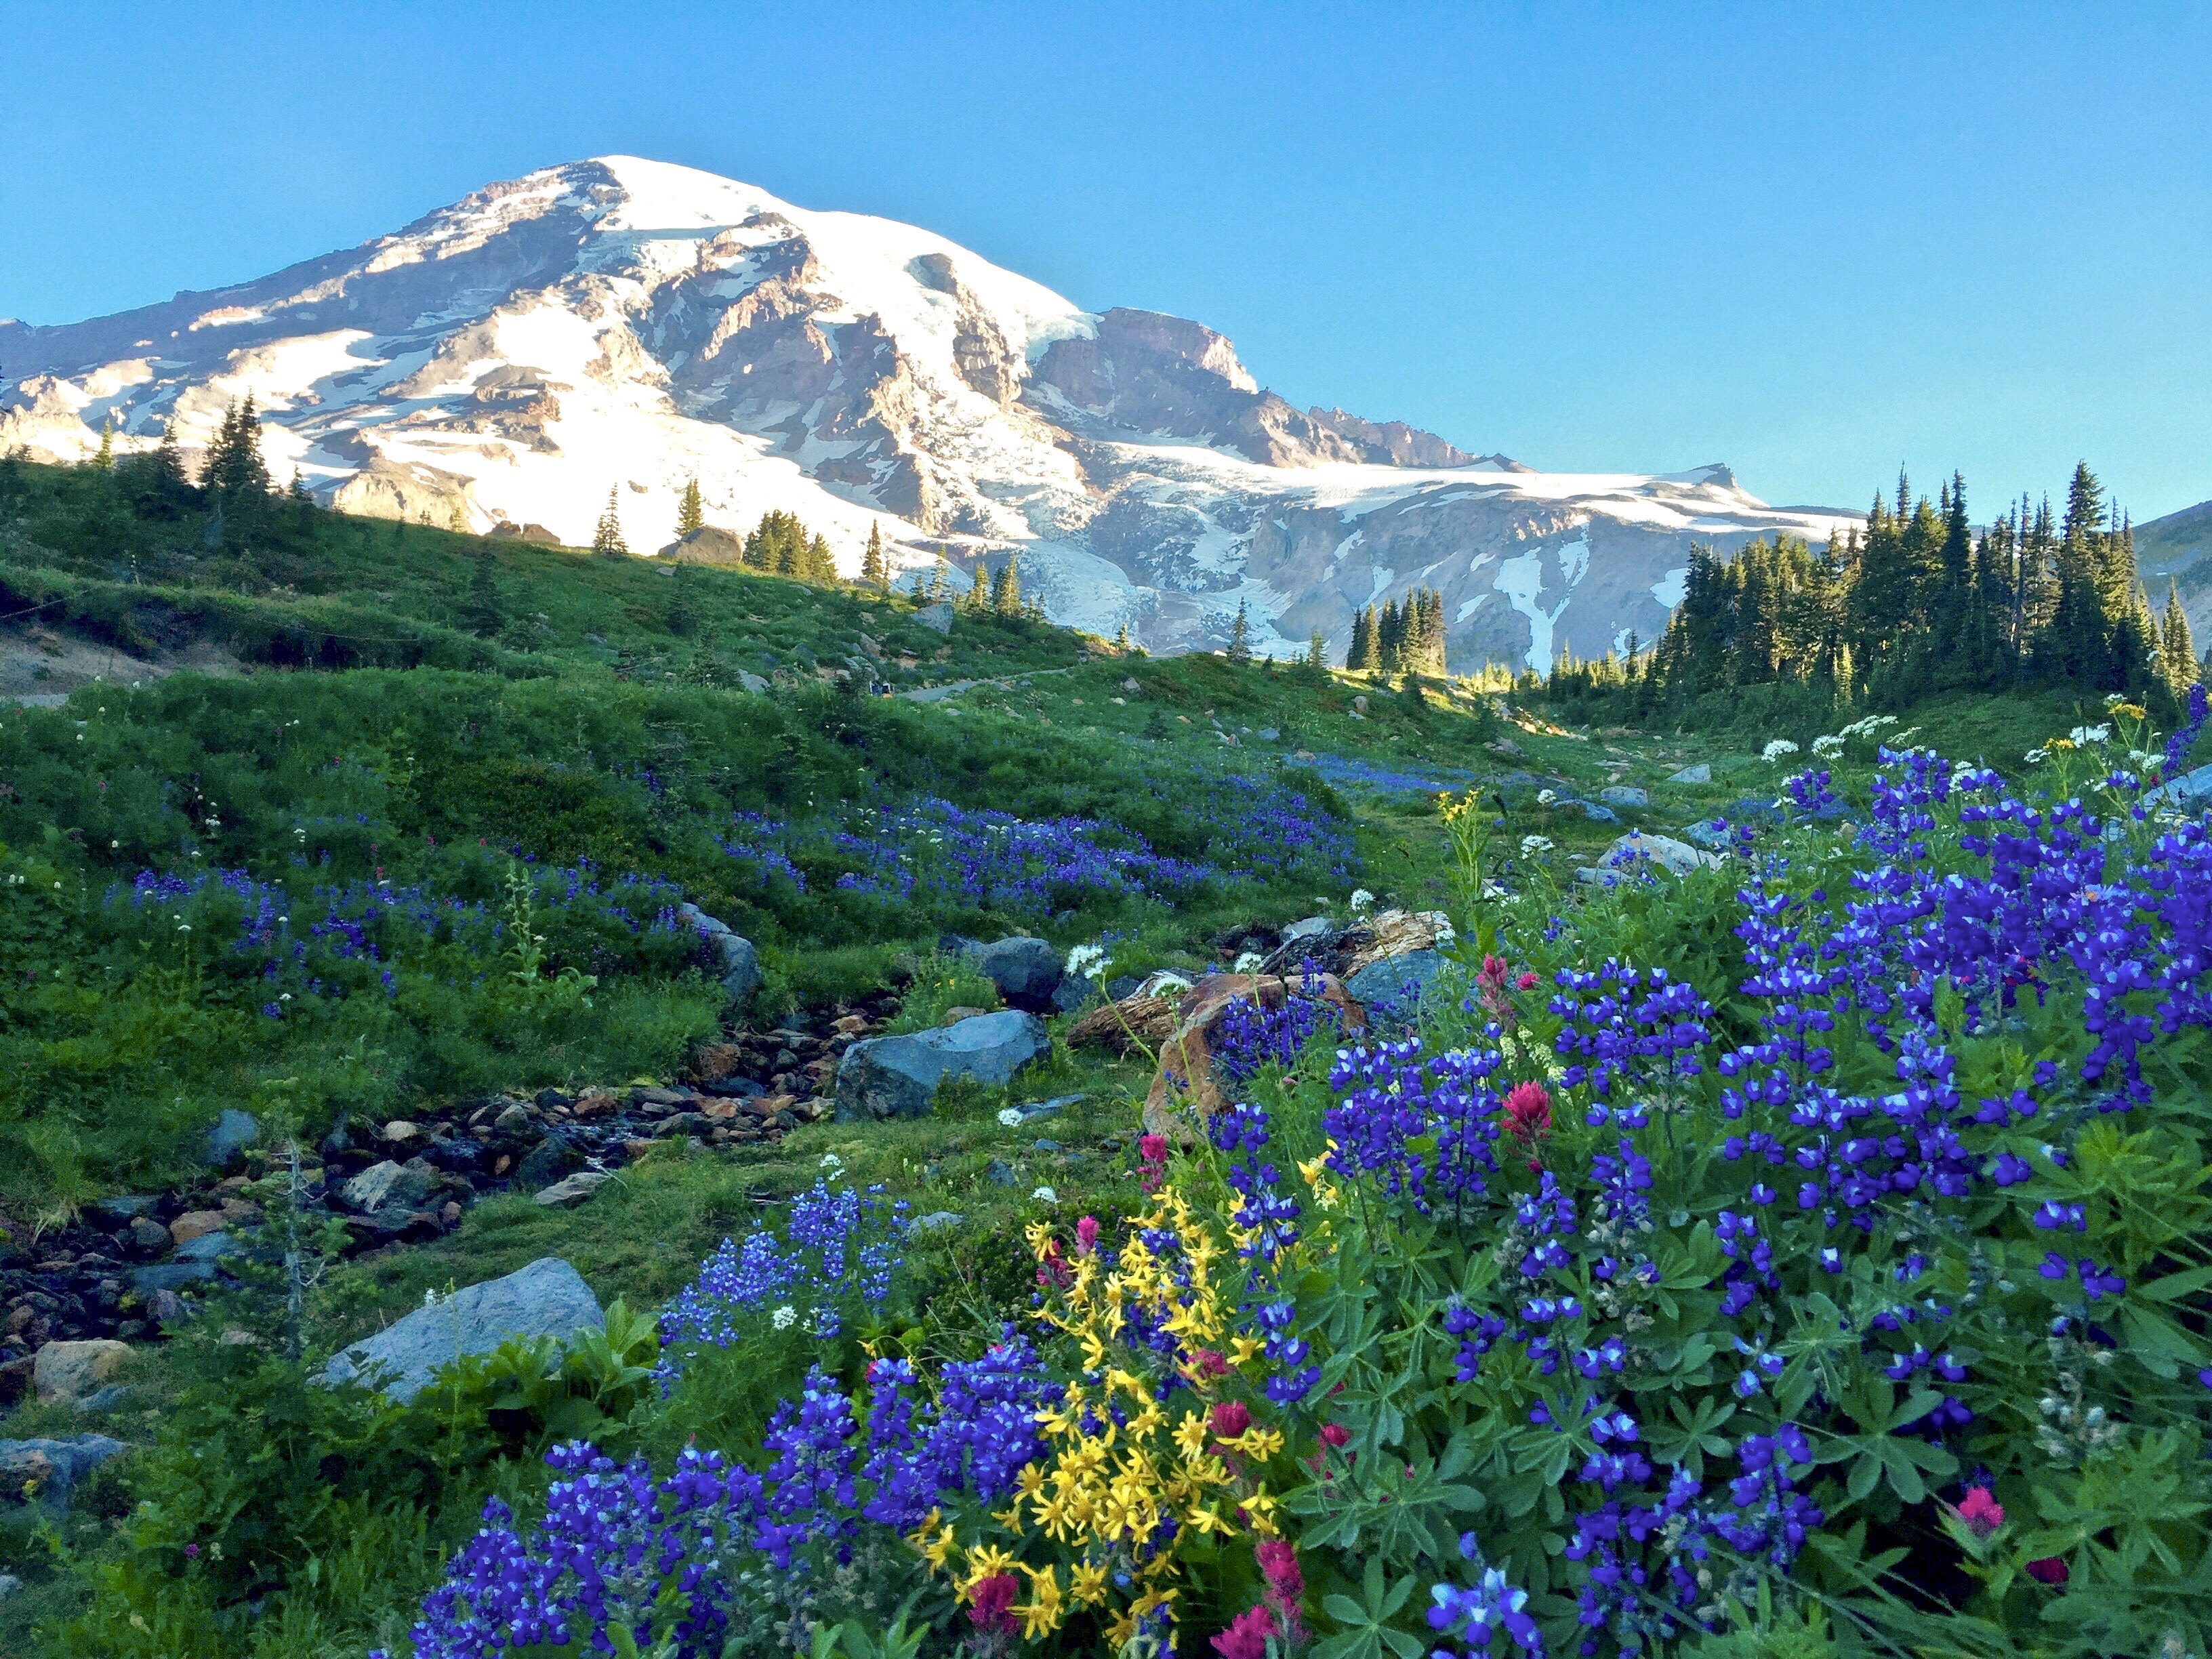 Majestic snow-capped mountain looms over slopes covered in blue and yellow wildflowers.